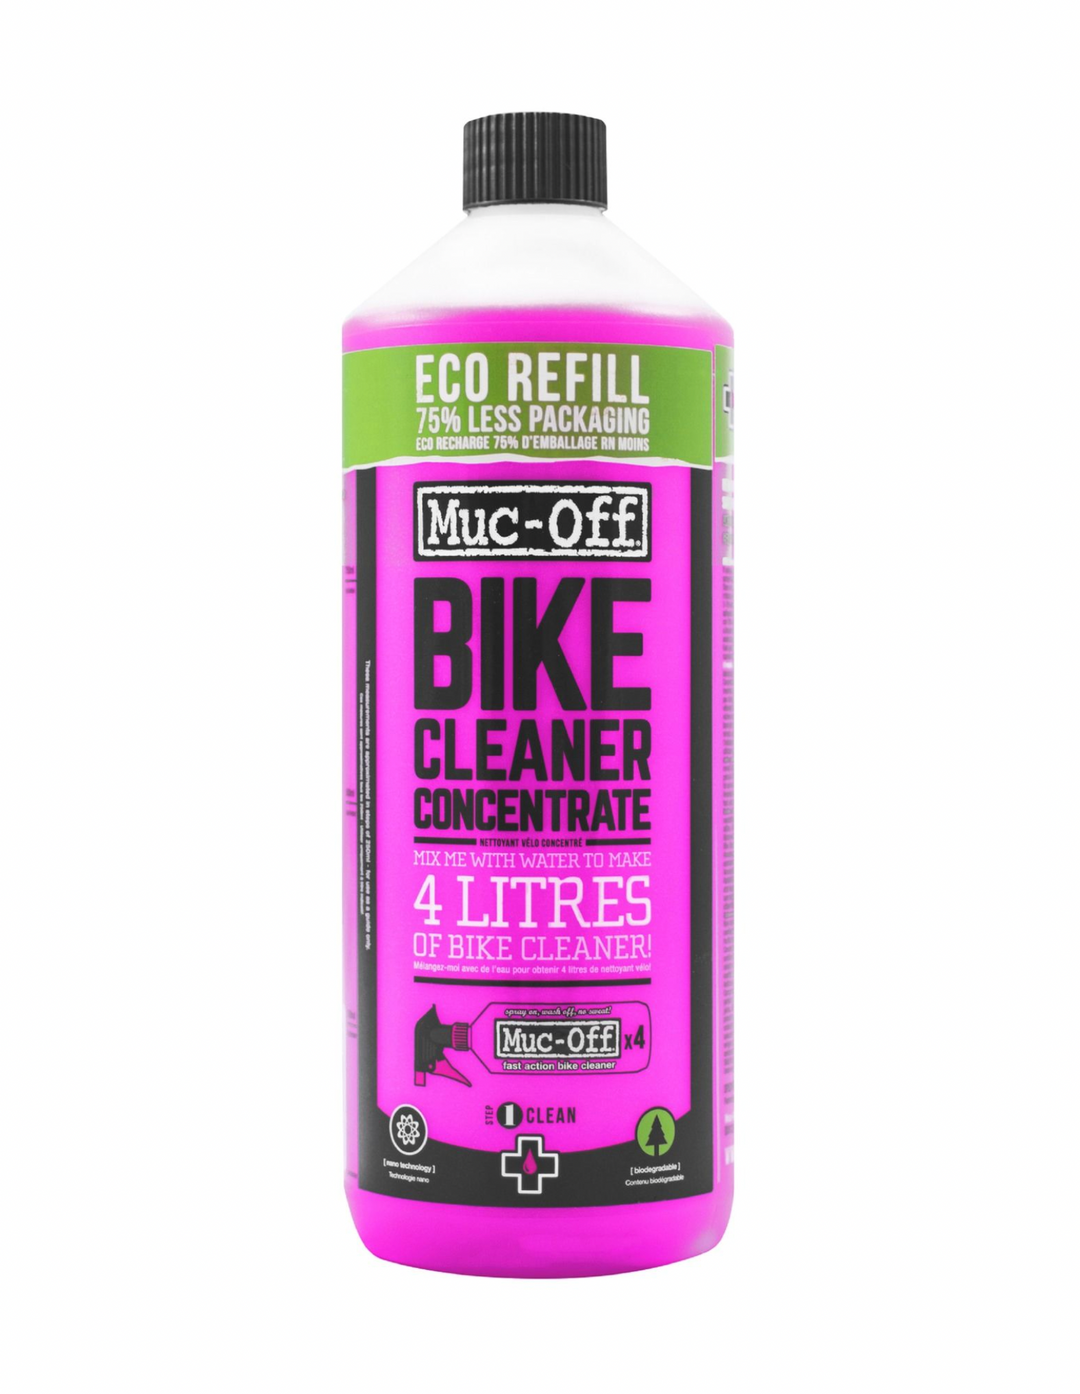 MUC-OFF CLEANER NANO TECH CONCENTRATE 1 LT - Mackay Cycles - [product_SKU] - Muc-Off